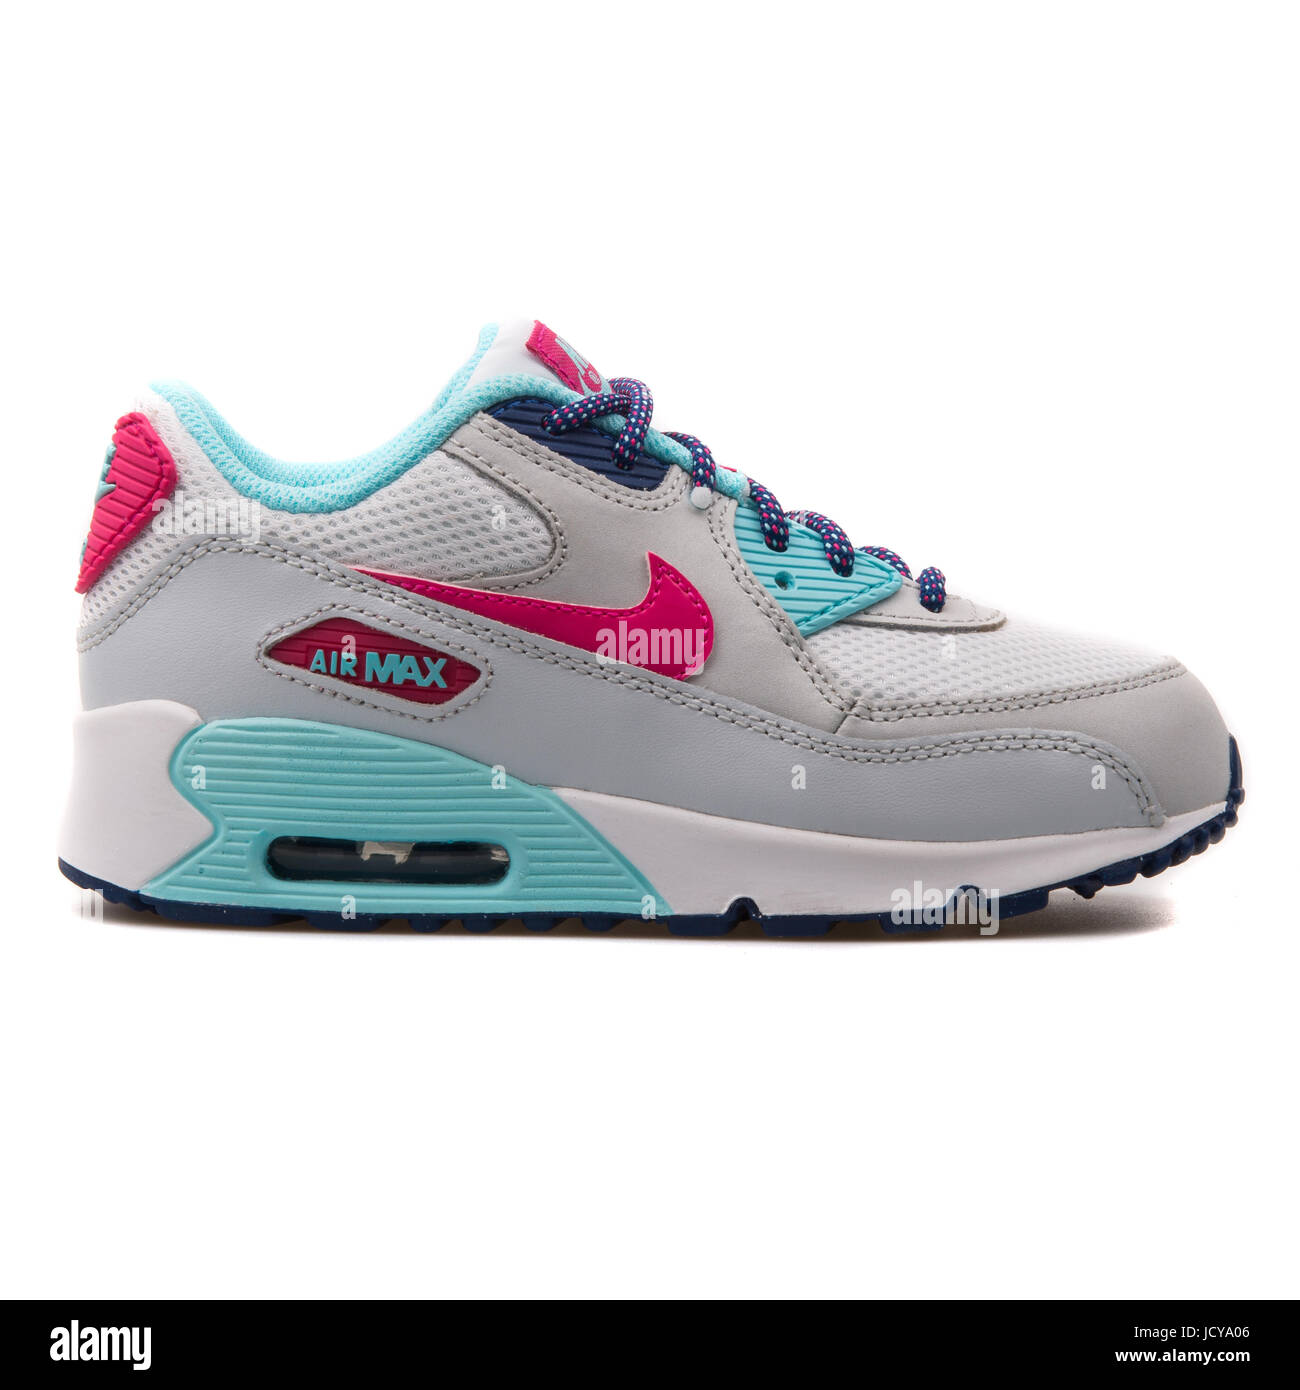 Kids nike air max High Resolution Stock Photography and Images - Alamy